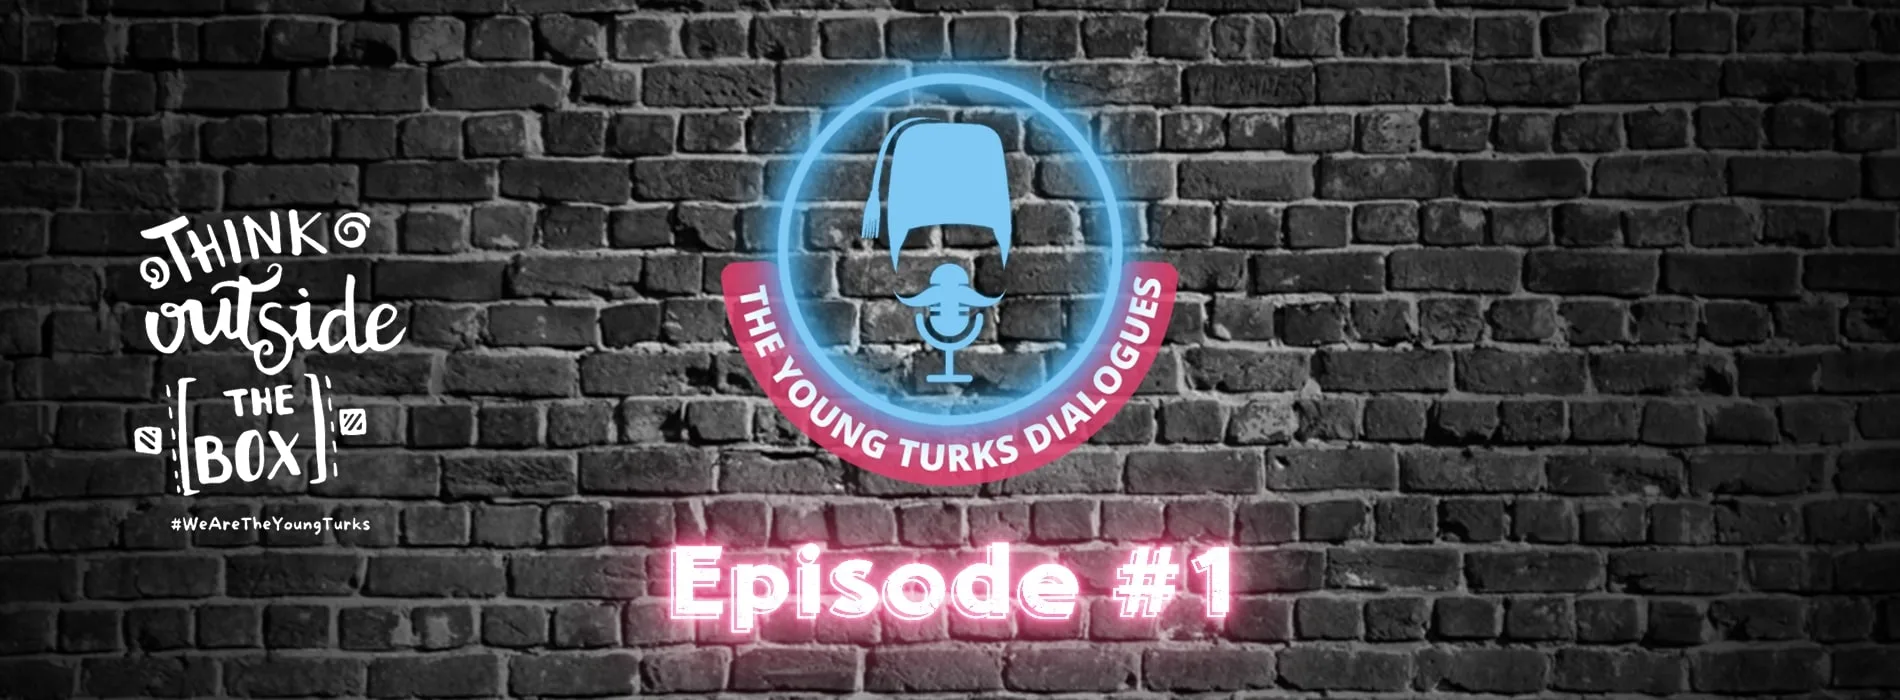 The Young Turk Dialogues: Episode 1 | Our Business Journey at Crobstacle